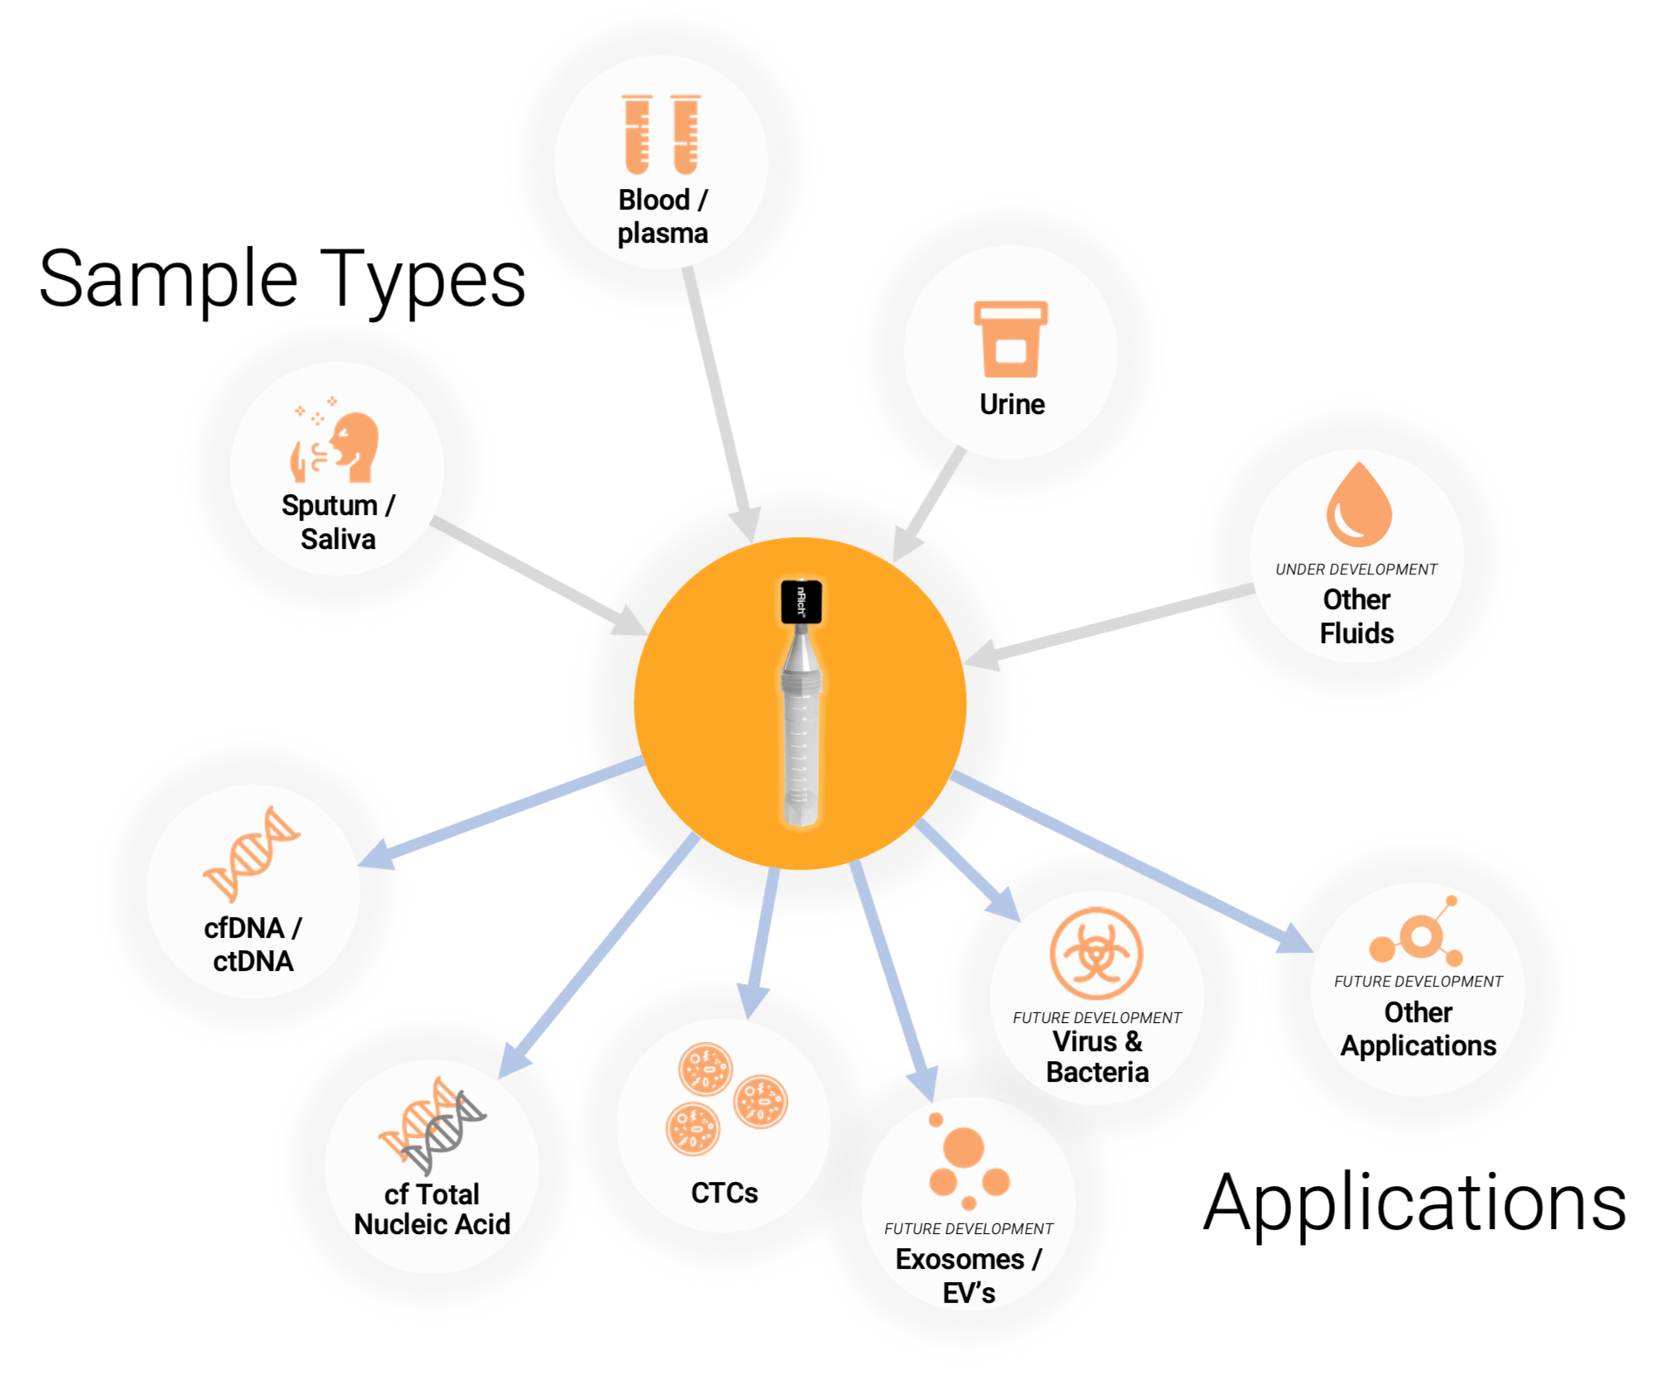 Sample Types and Applications spoke diagram